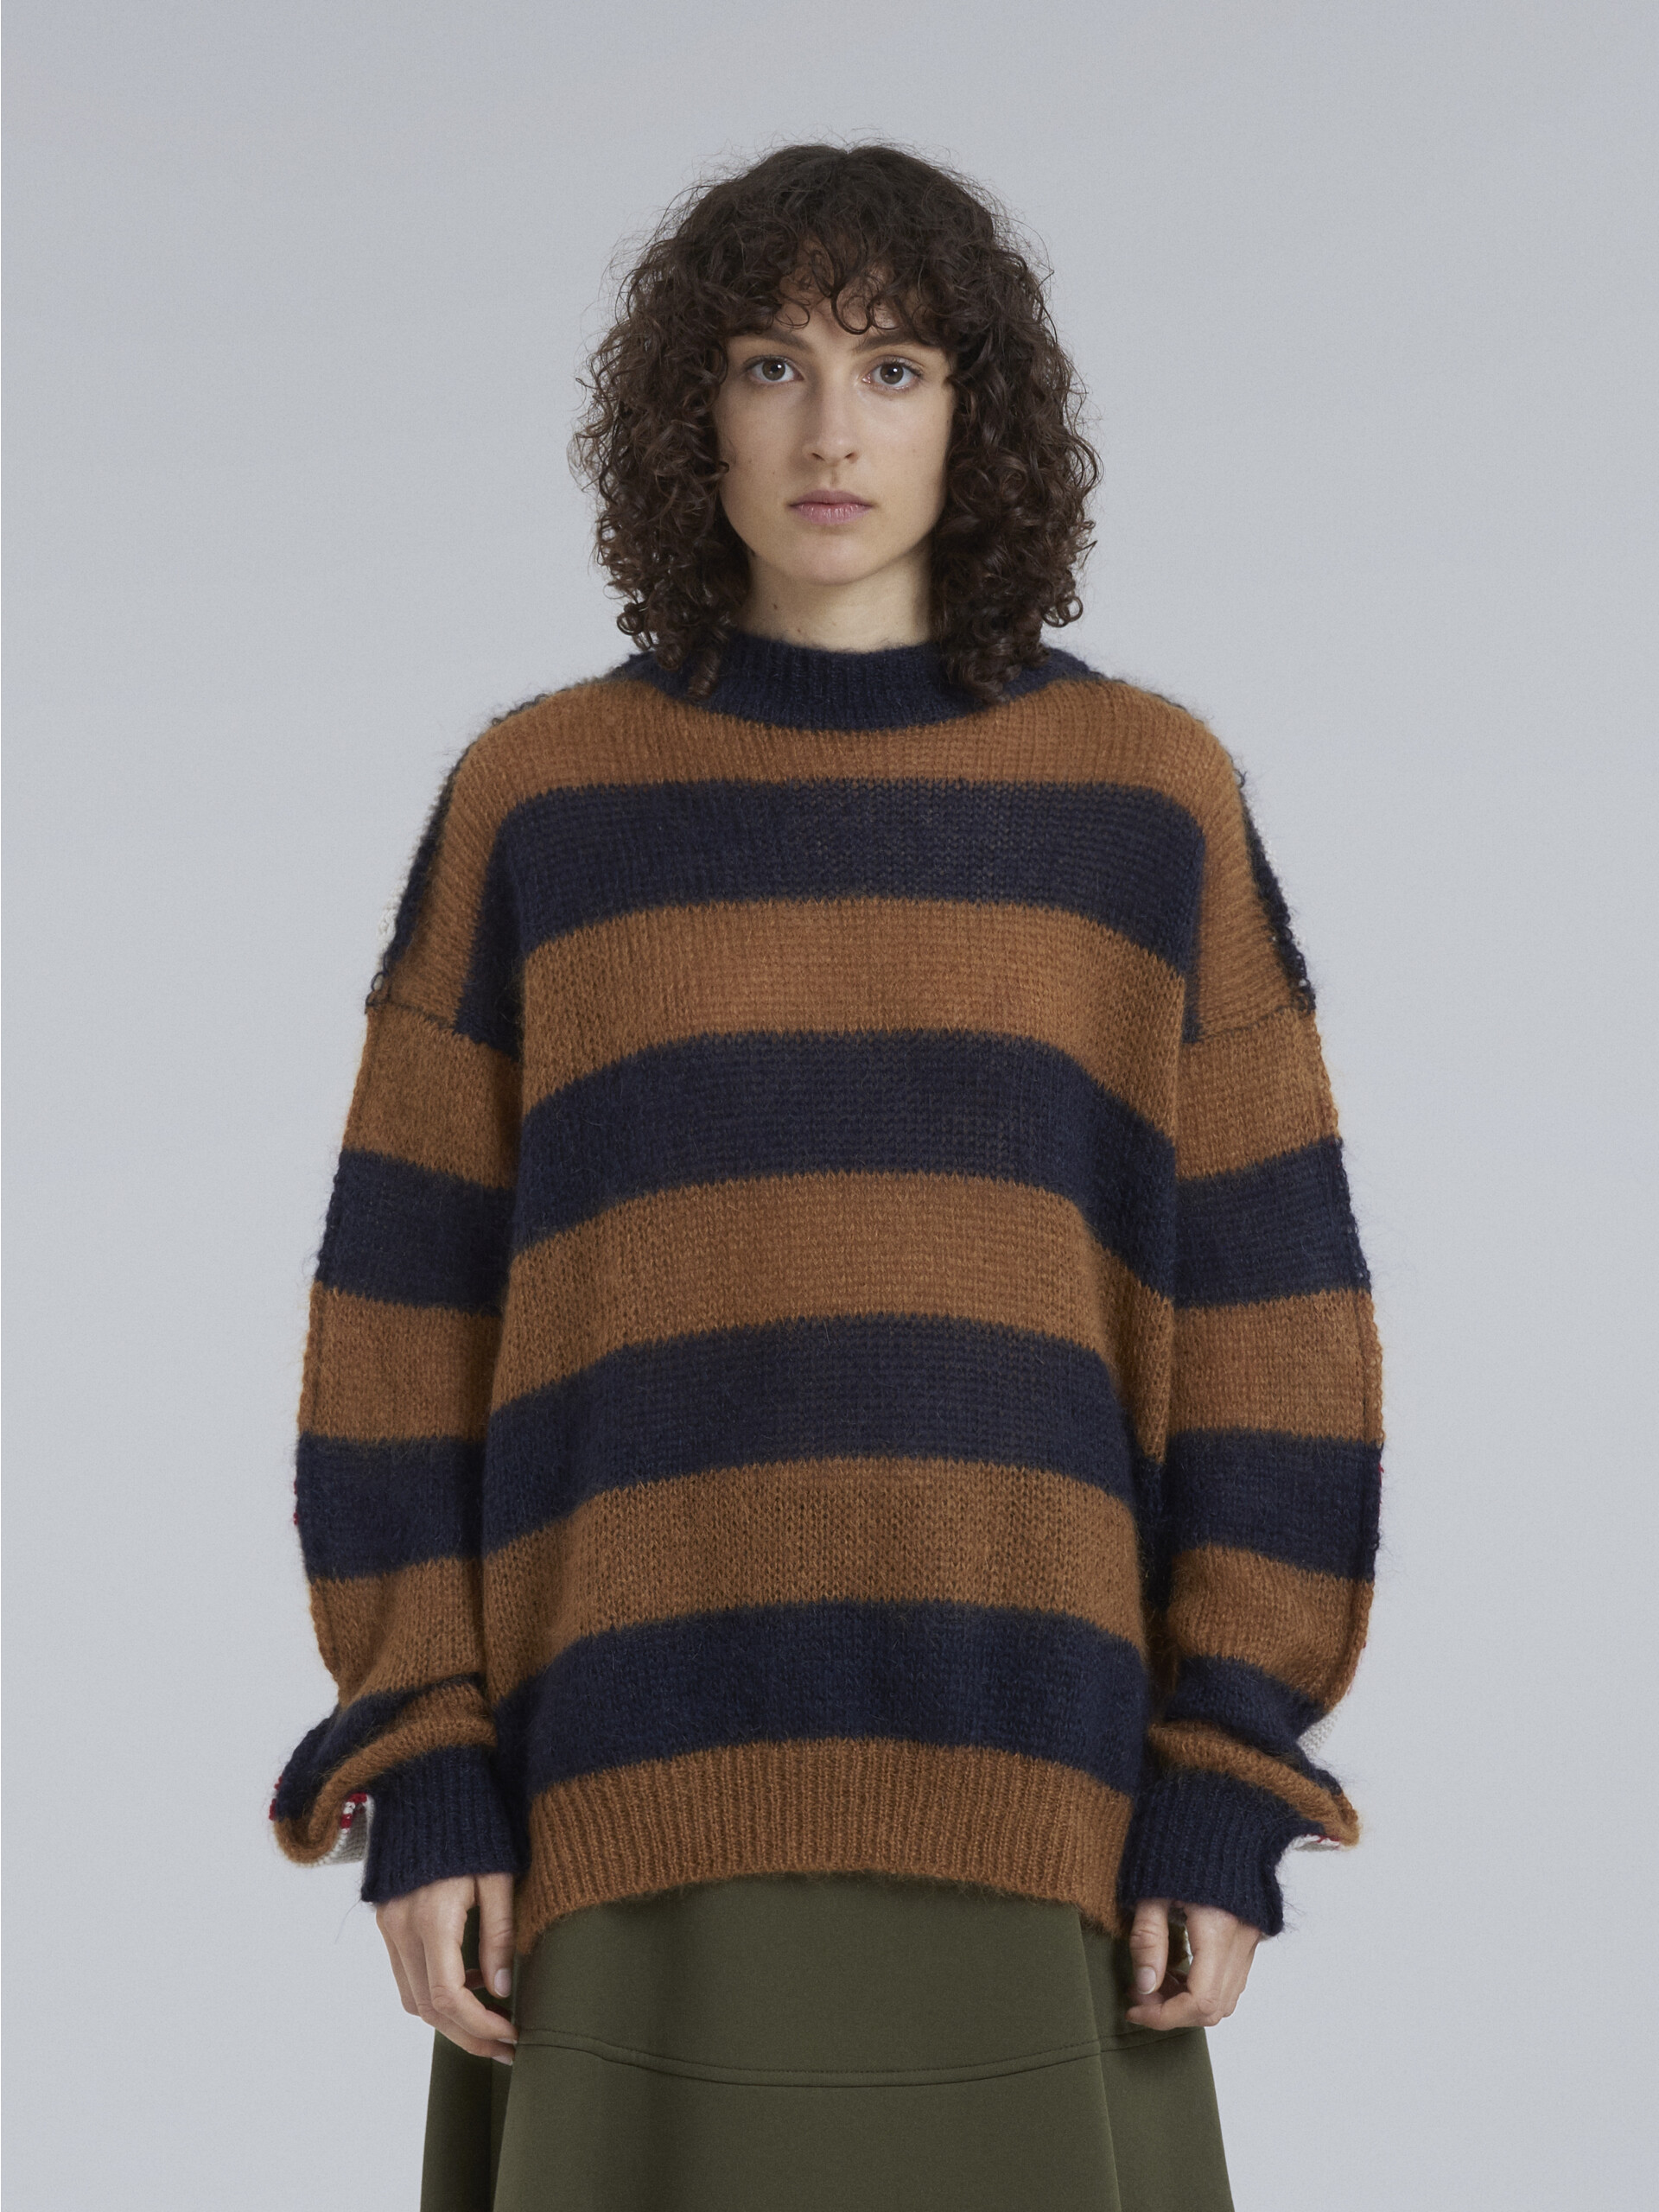 Wool and mohair sweater with raw-edged seams - Pullovers - Image 2